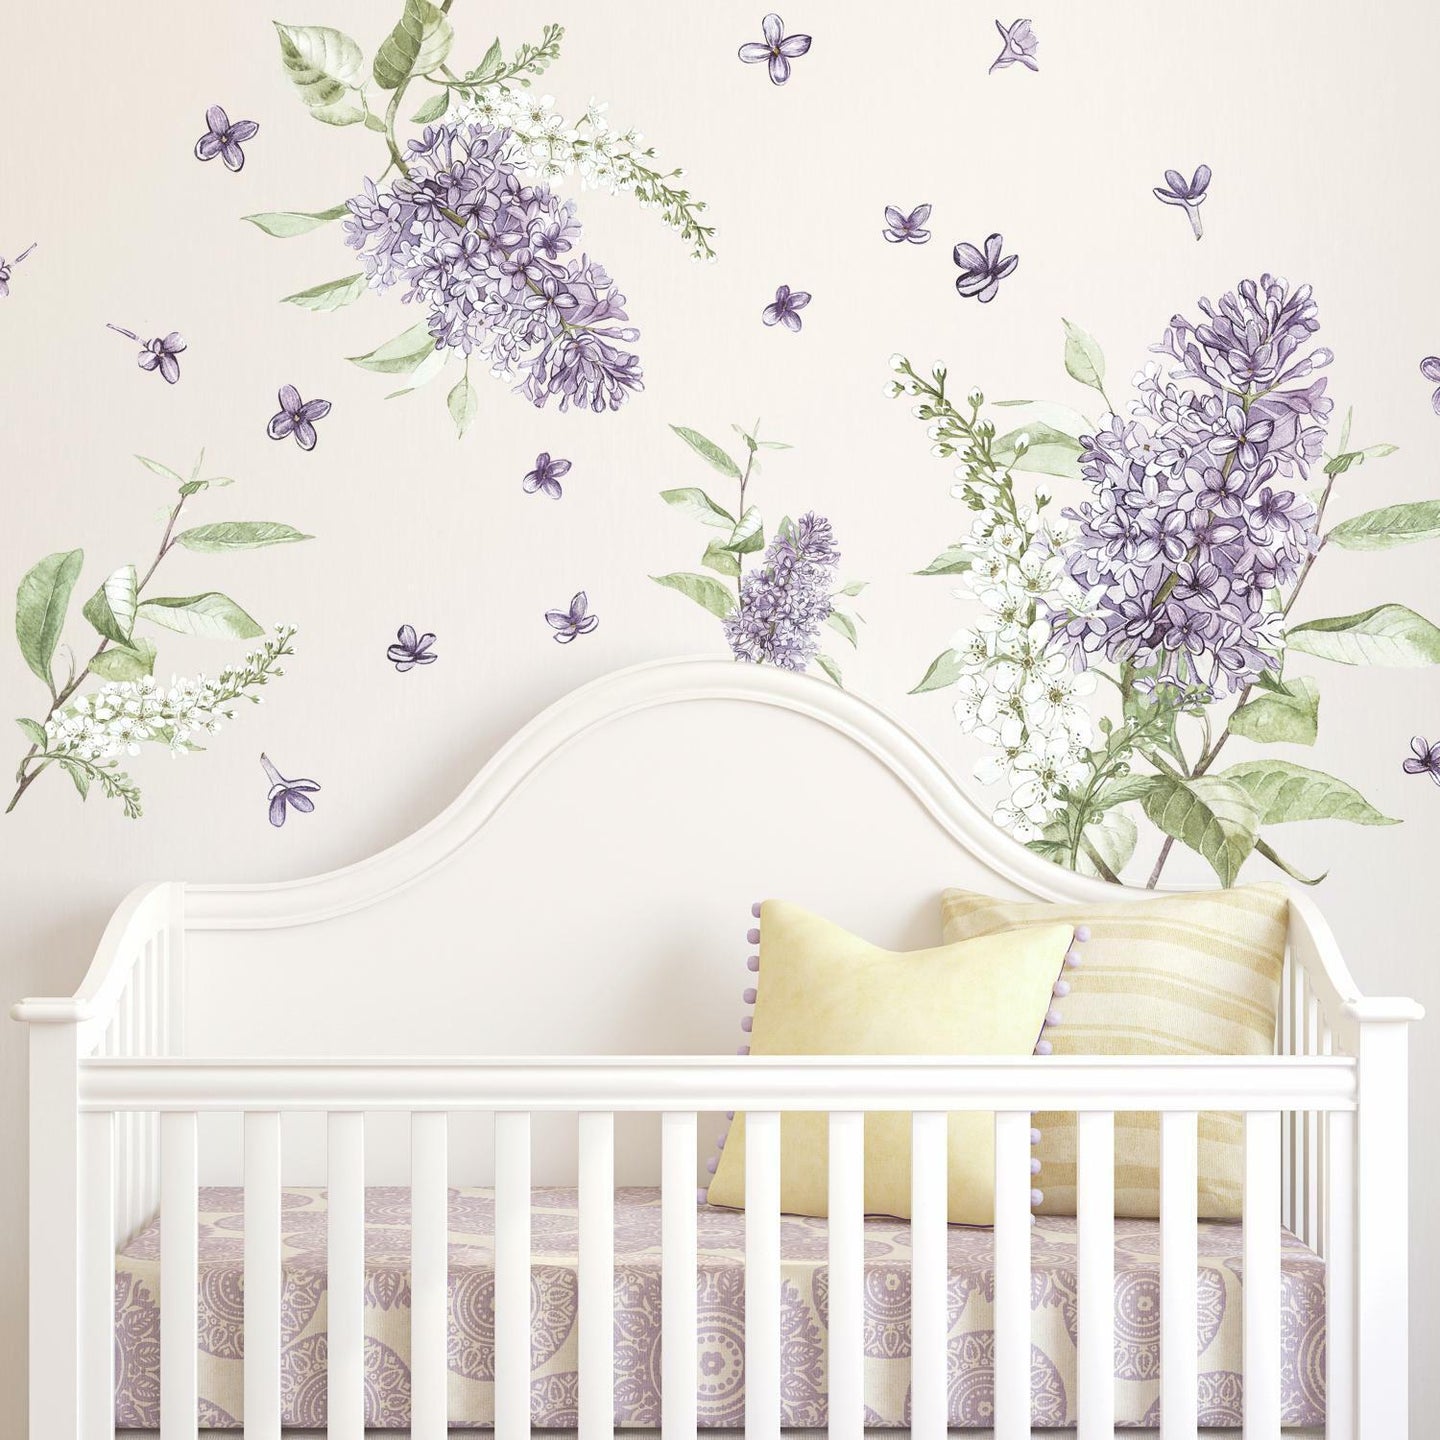 LILAC PEEL AND STICK GIANT WALL DECALS